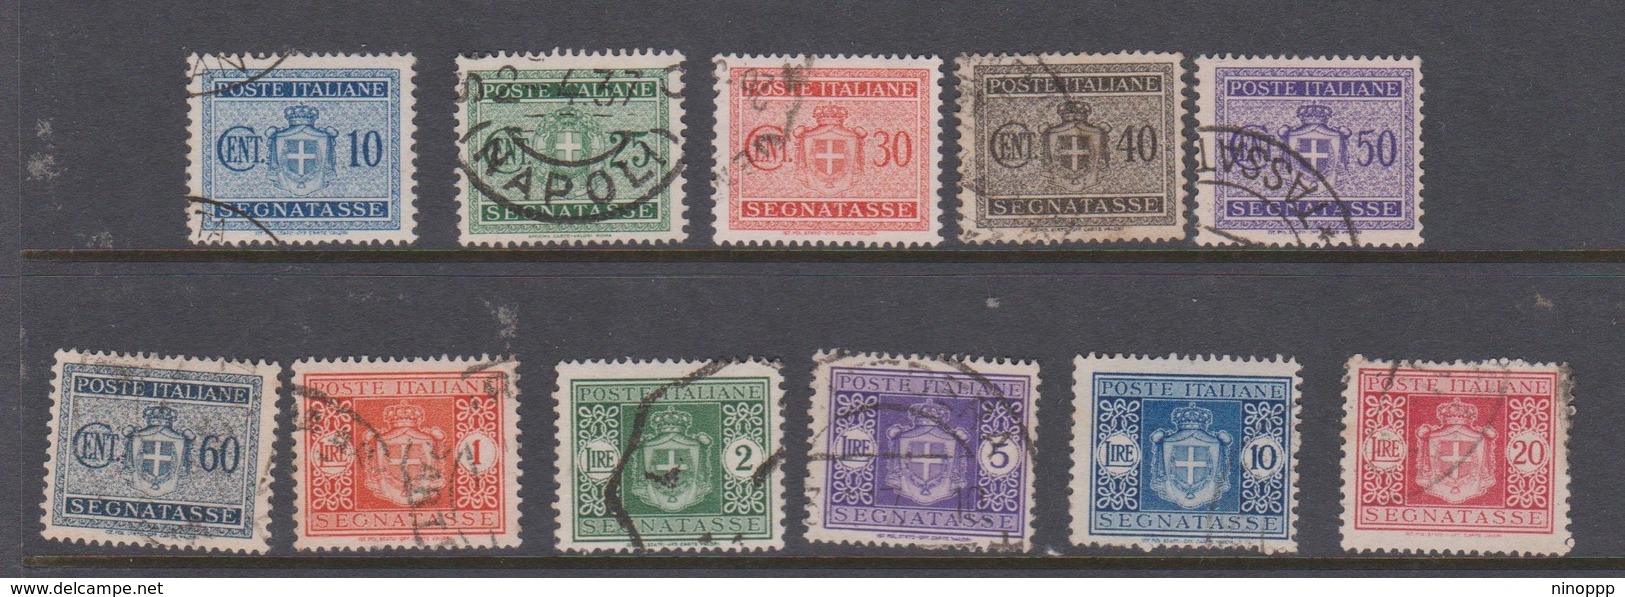 Italy Luogotenenza PD 60-70 1945-46 Postage Due,used, - Postage Due